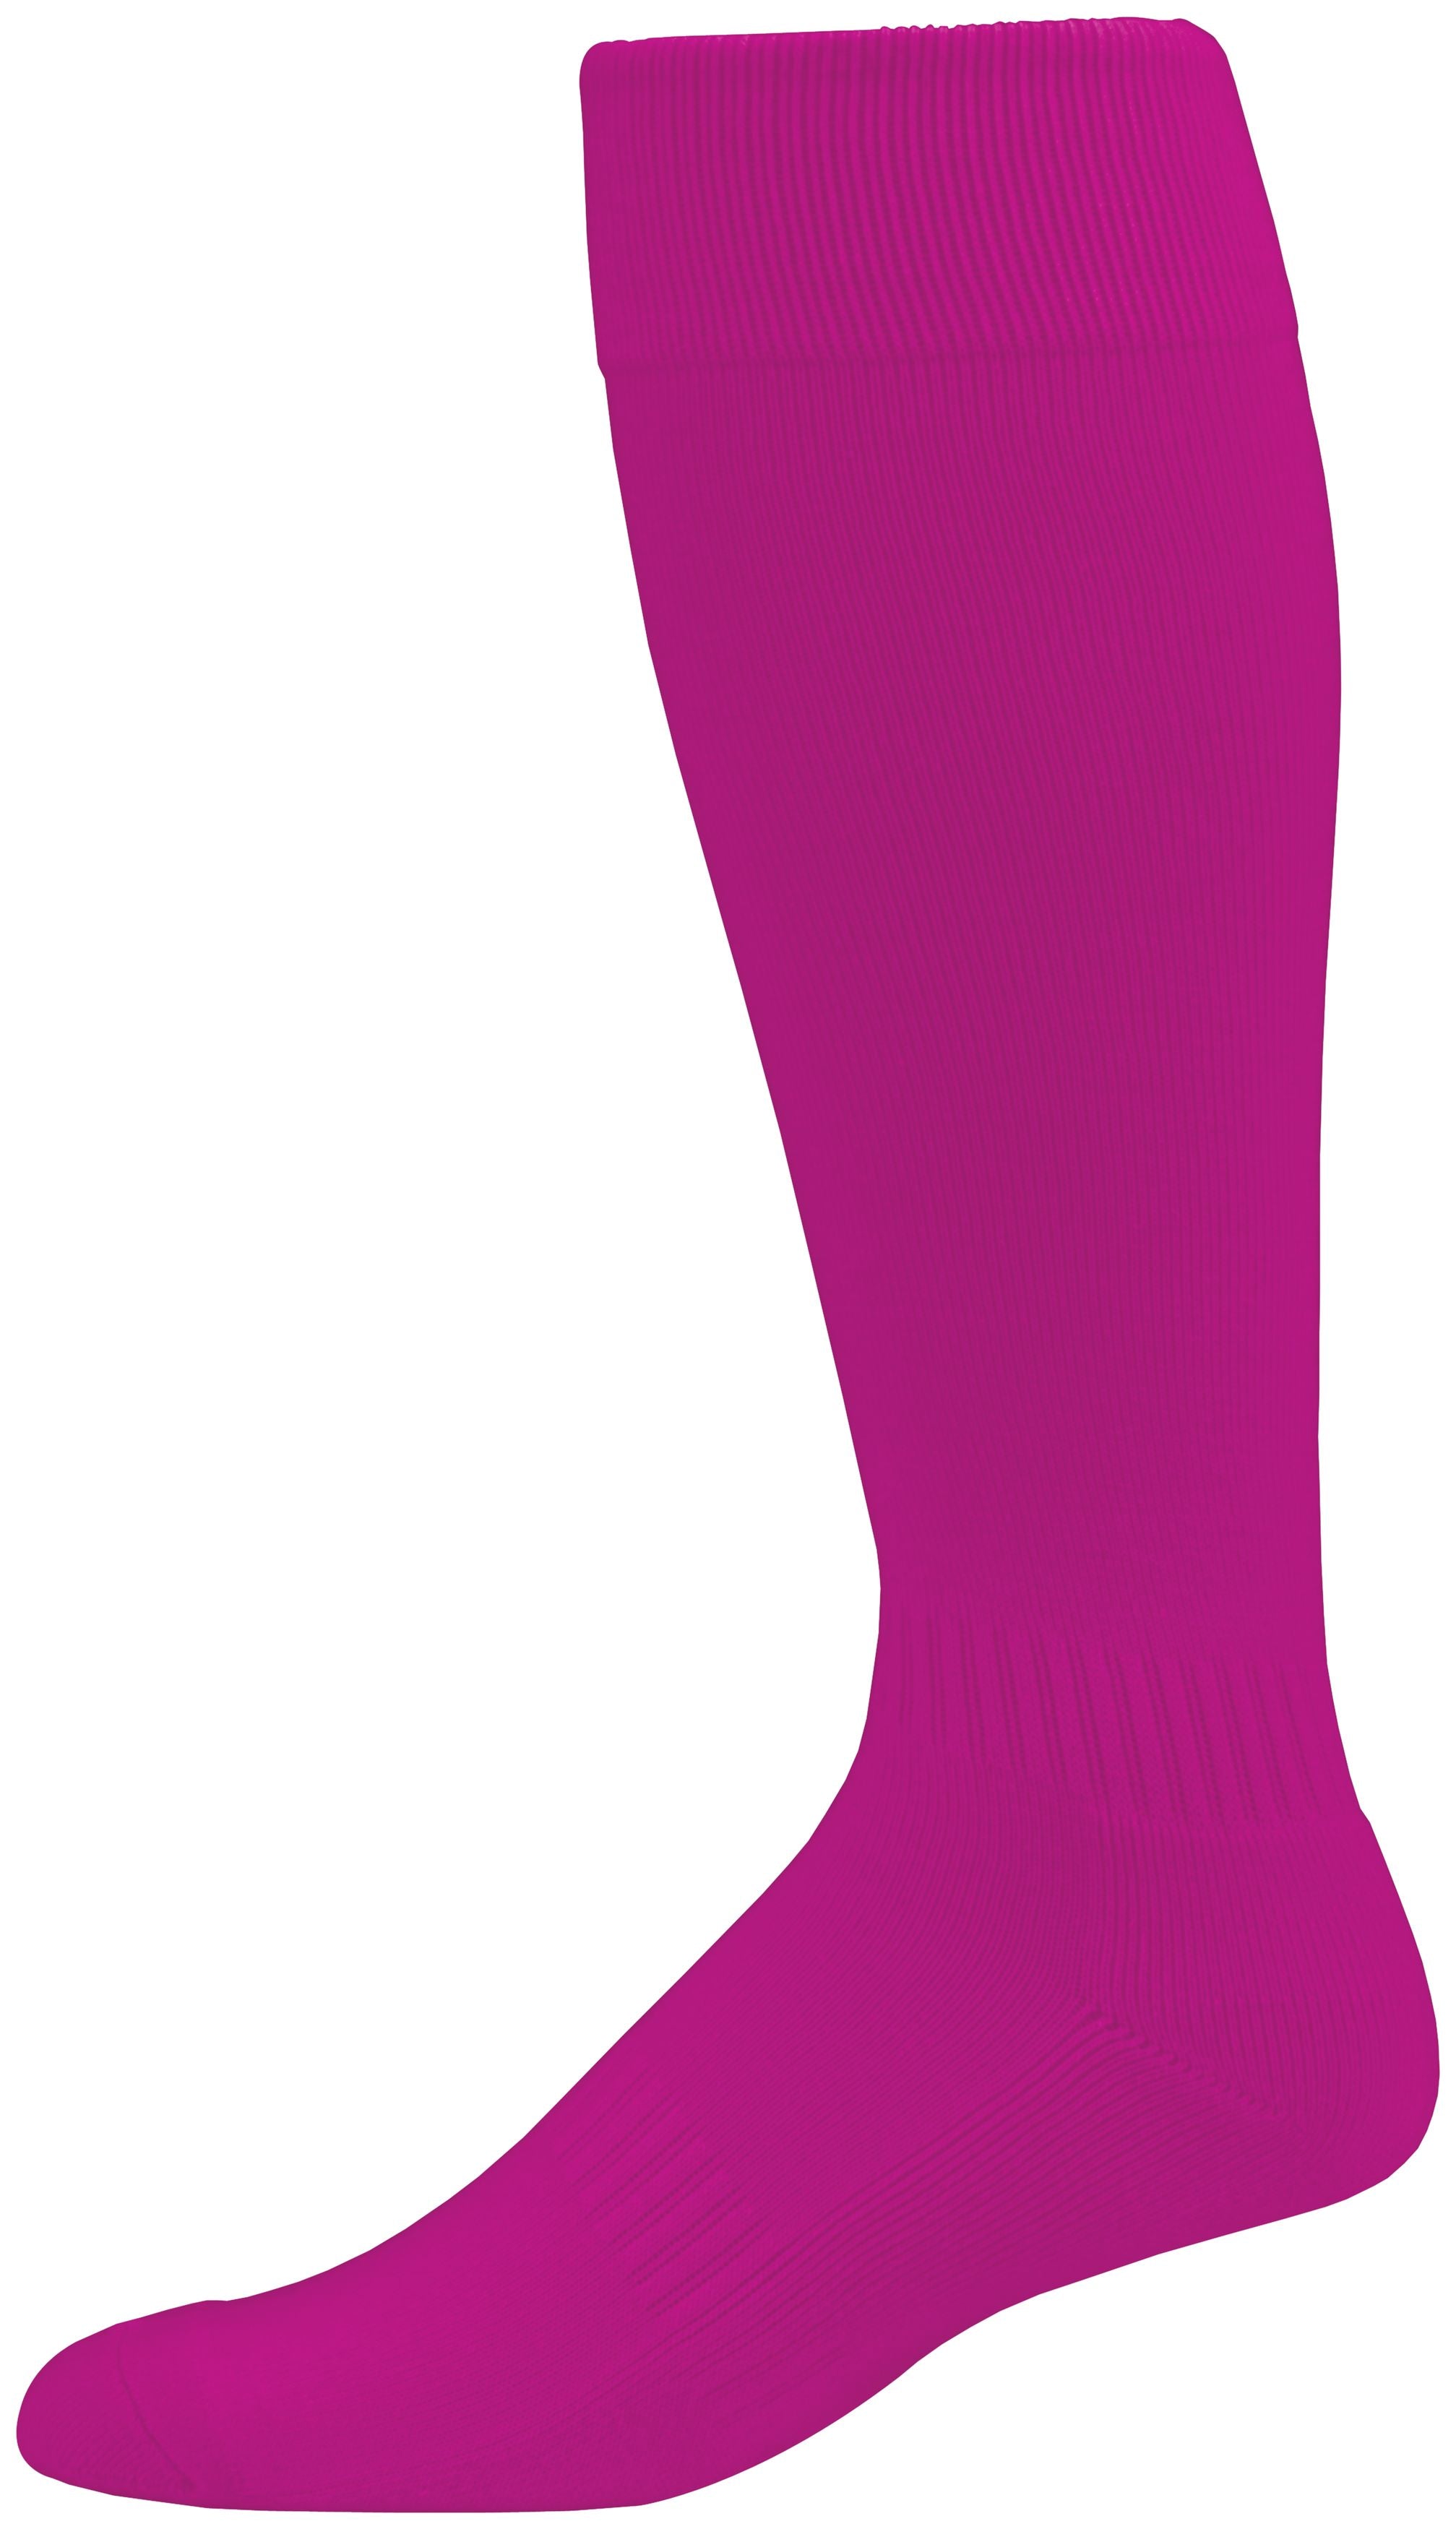 Augusta Sportswear Elite Multi-Sport Sock in Power Pink  -Part of the Accessories, Augusta-Products, Accessories-Socks product lines at KanaleyCreations.com